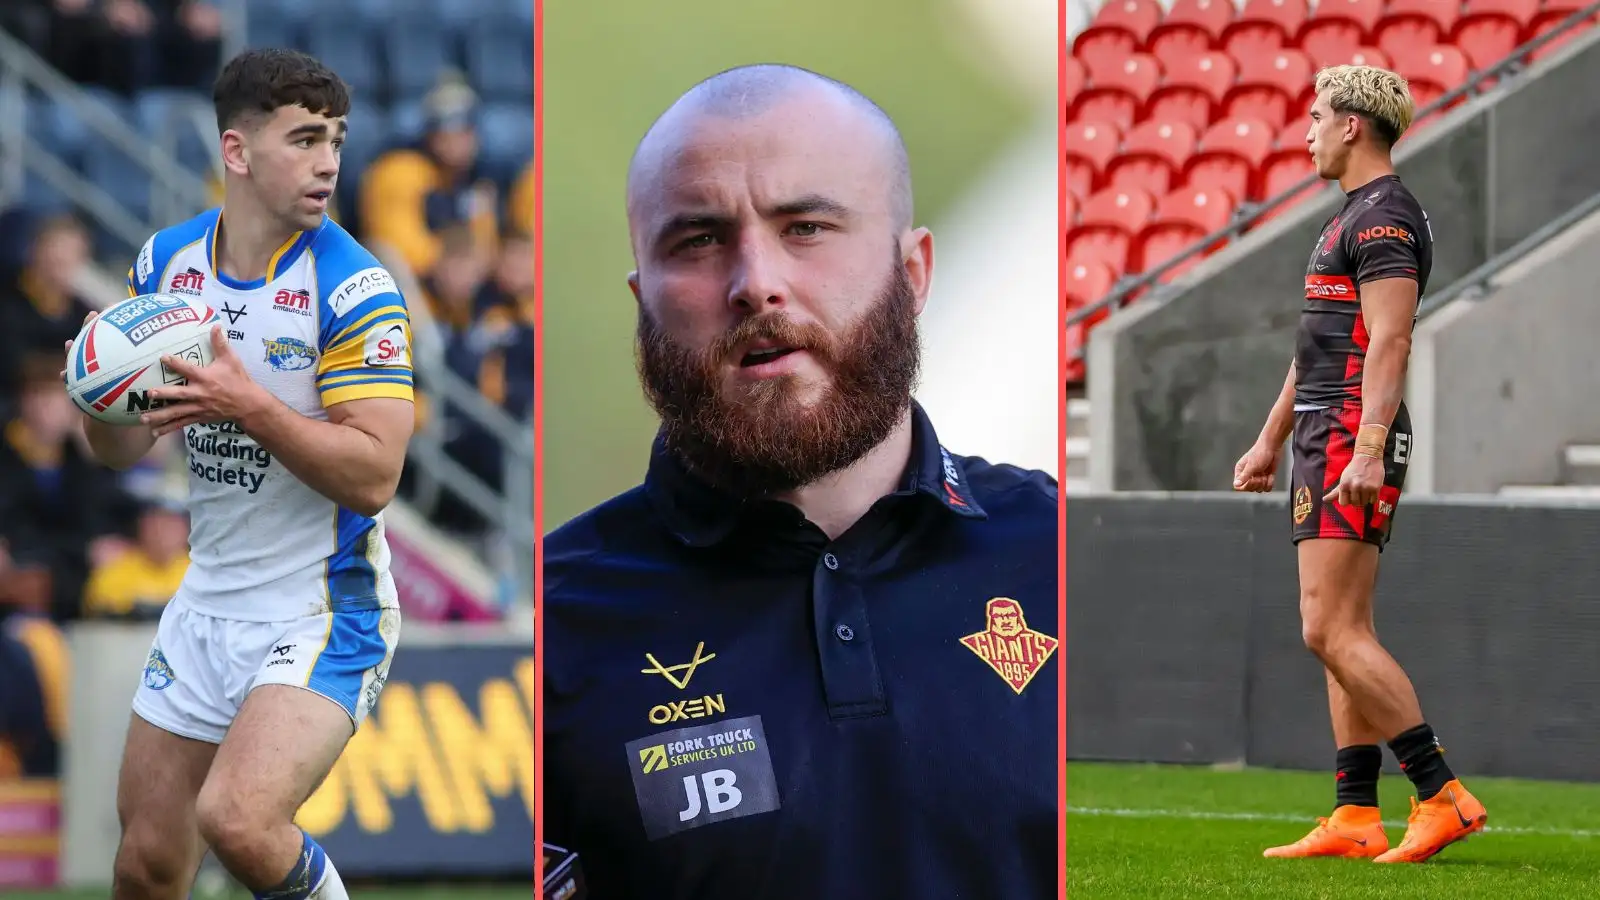 Leeds duo among 6 Super League players who could move imminently